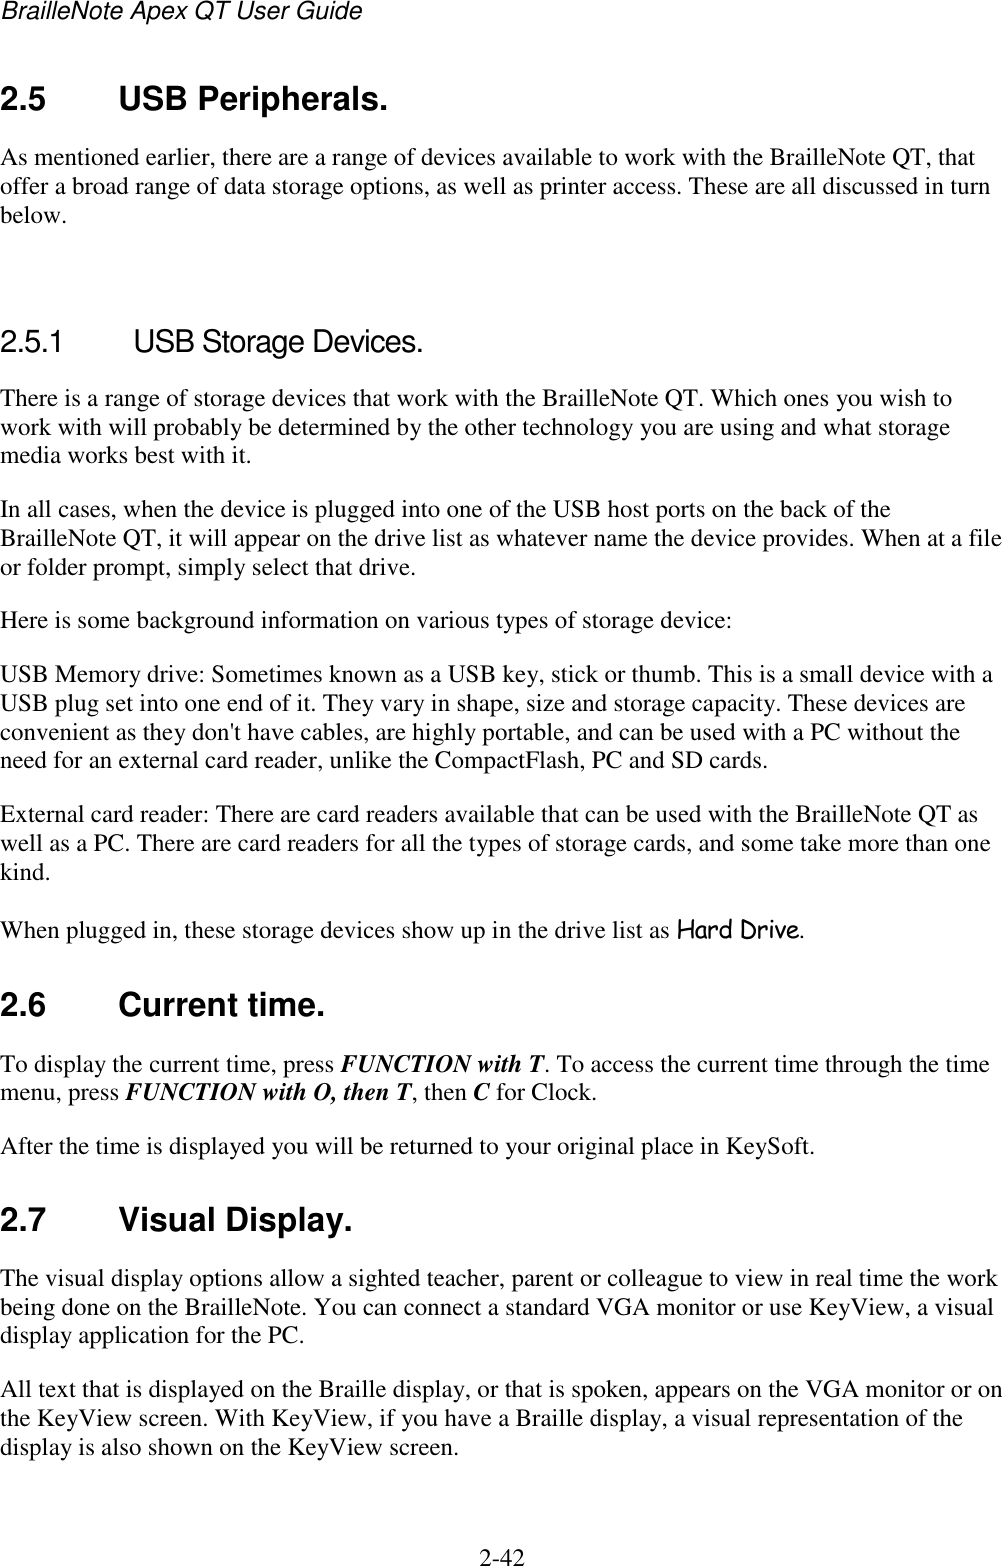 BrailleNote Apex QT User Guide  2-42   2.5  USB Peripherals. As mentioned earlier, there are a range of devices available to work with the BrailleNote QT, that offer a broad range of data storage options, as well as printer access. These are all discussed in turn below.    2.5.1  USB Storage Devices. There is a range of storage devices that work with the BrailleNote QT. Which ones you wish to work with will probably be determined by the other technology you are using and what storage media works best with it. In all cases, when the device is plugged into one of the USB host ports on the back of the BrailleNote QT, it will appear on the drive list as whatever name the device provides. When at a file or folder prompt, simply select that drive. Here is some background information on various types of storage device: USB Memory drive: Sometimes known as a USB key, stick or thumb. This is a small device with a USB plug set into one end of it. They vary in shape, size and storage capacity. These devices are convenient as they don&apos;t have cables, are highly portable, and can be used with a PC without the need for an external card reader, unlike the CompactFlash, PC and SD cards. External card reader: There are card readers available that can be used with the BrailleNote QT as well as a PC. There are card readers for all the types of storage cards, and some take more than one kind.  When plugged in, these storage devices show up in the drive list as Hard Drive.  2.6  Current time. To display the current time, press FUNCTION with T. To access the current time through the time menu, press FUNCTION with O, then T, then C for Clock. After the time is displayed you will be returned to your original place in KeySoft.  2.7  Visual Display. The visual display options allow a sighted teacher, parent or colleague to view in real time the work being done on the BrailleNote. You can connect a standard VGA monitor or use KeyView, a visual display application for the PC. All text that is displayed on the Braille display, or that is spoken, appears on the VGA monitor or on the KeyView screen. With KeyView, if you have a Braille display, a visual representation of the display is also shown on the KeyView screen.   